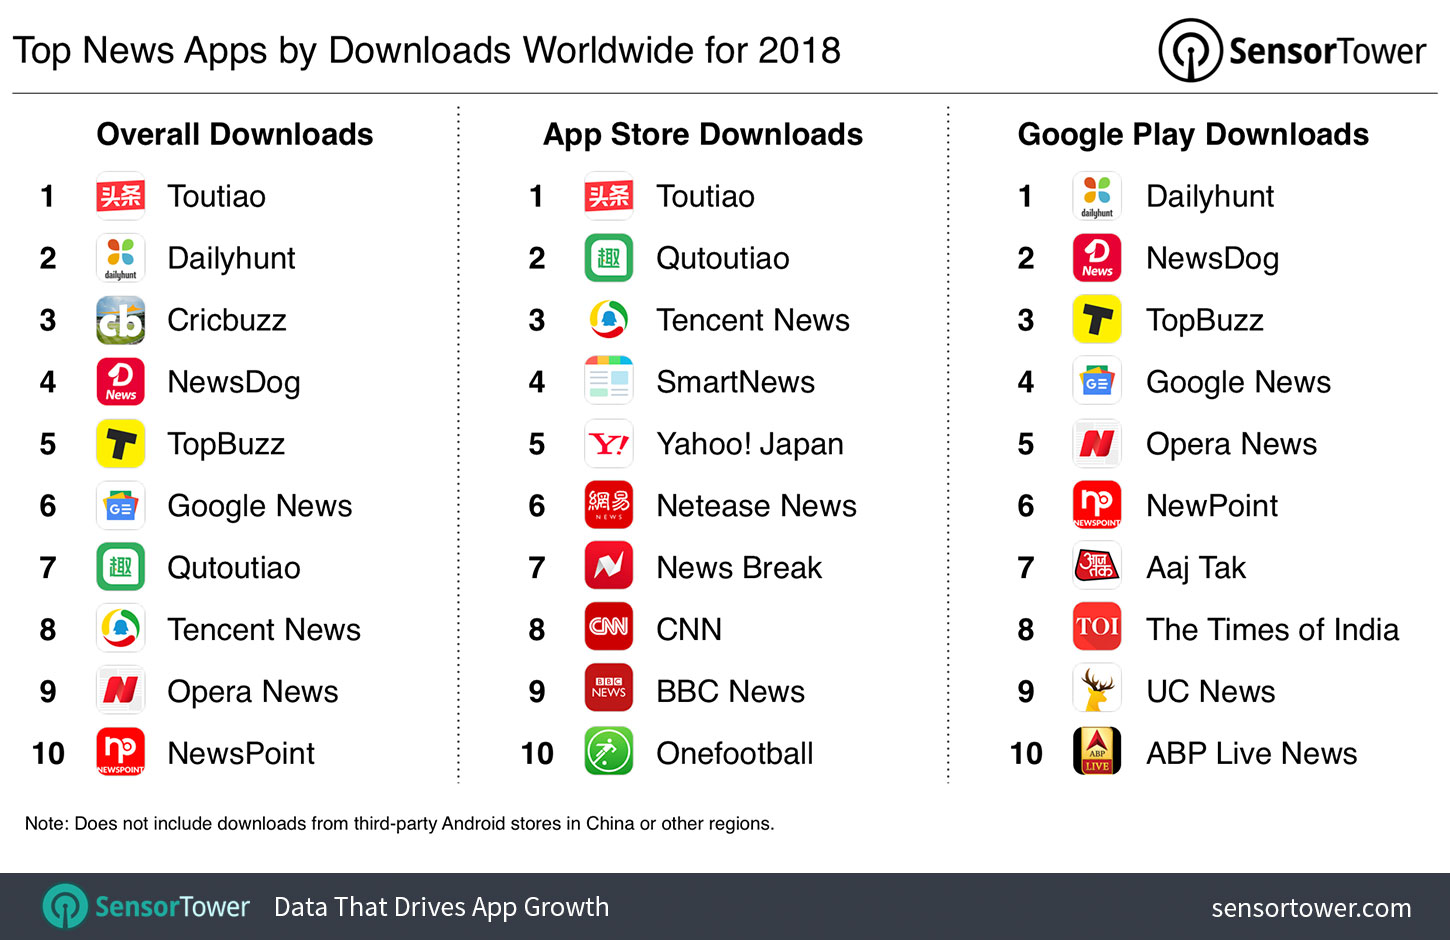 Top News Apps for 2018 Worldwide by Downloads